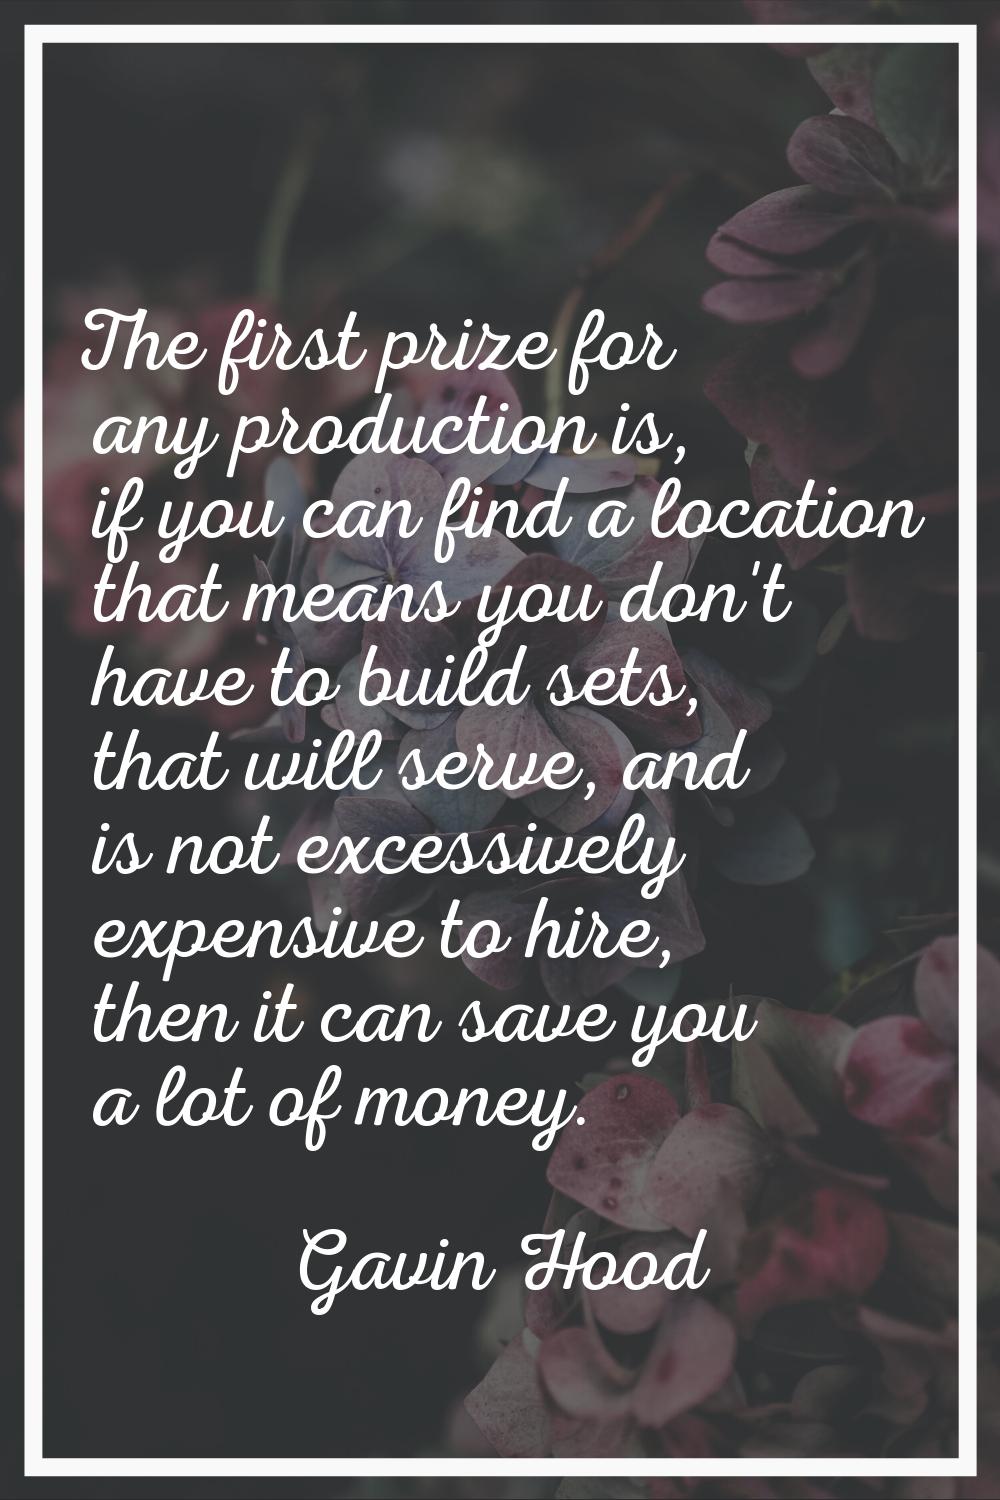 The first prize for any production is, if you can find a location that means you don't have to buil